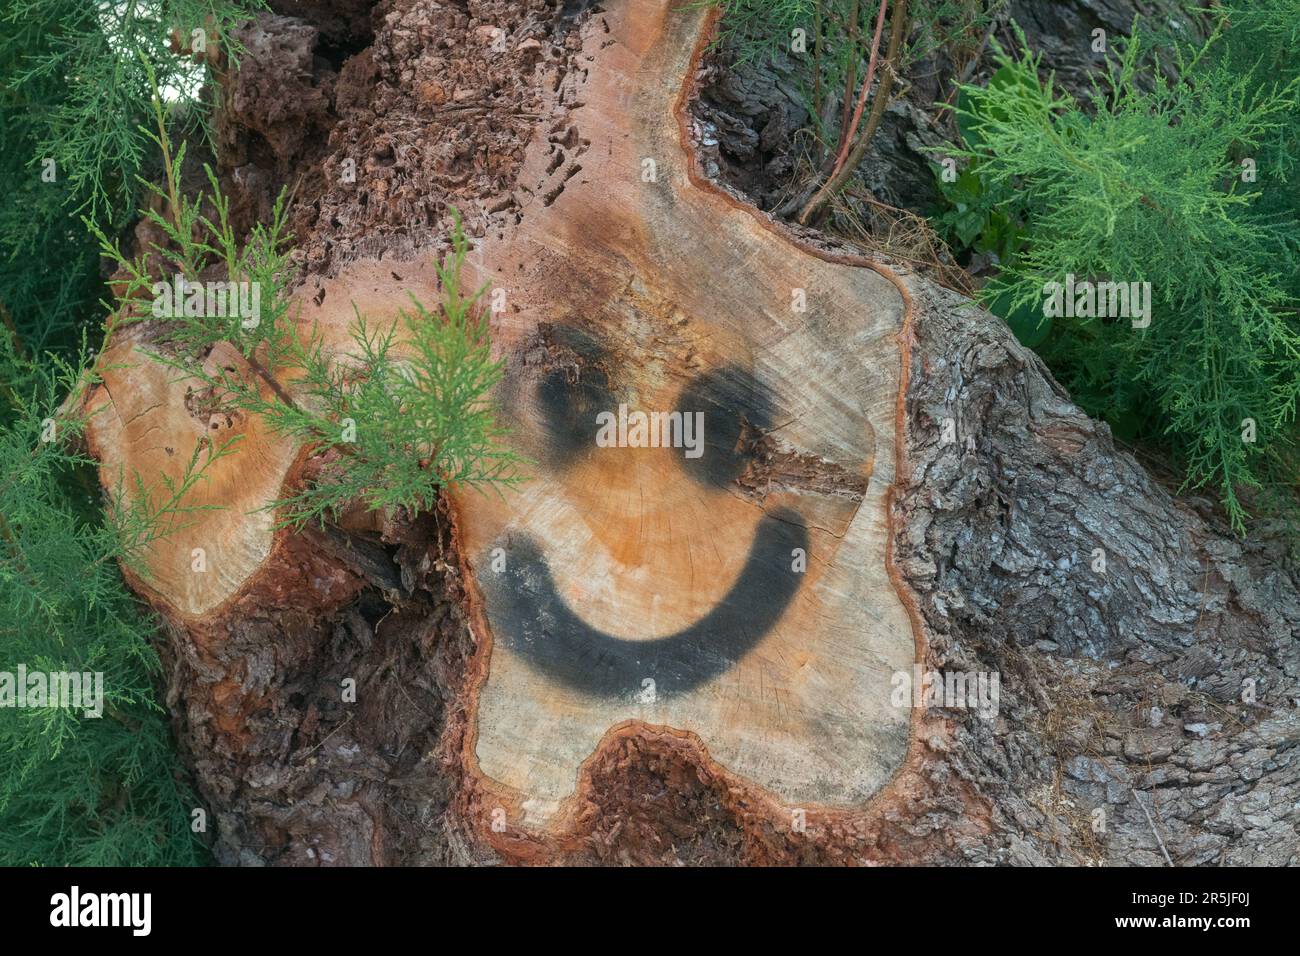 Large tree trunk cut down. Spray painted face on the cut part of the tree trunk. Stock Photo